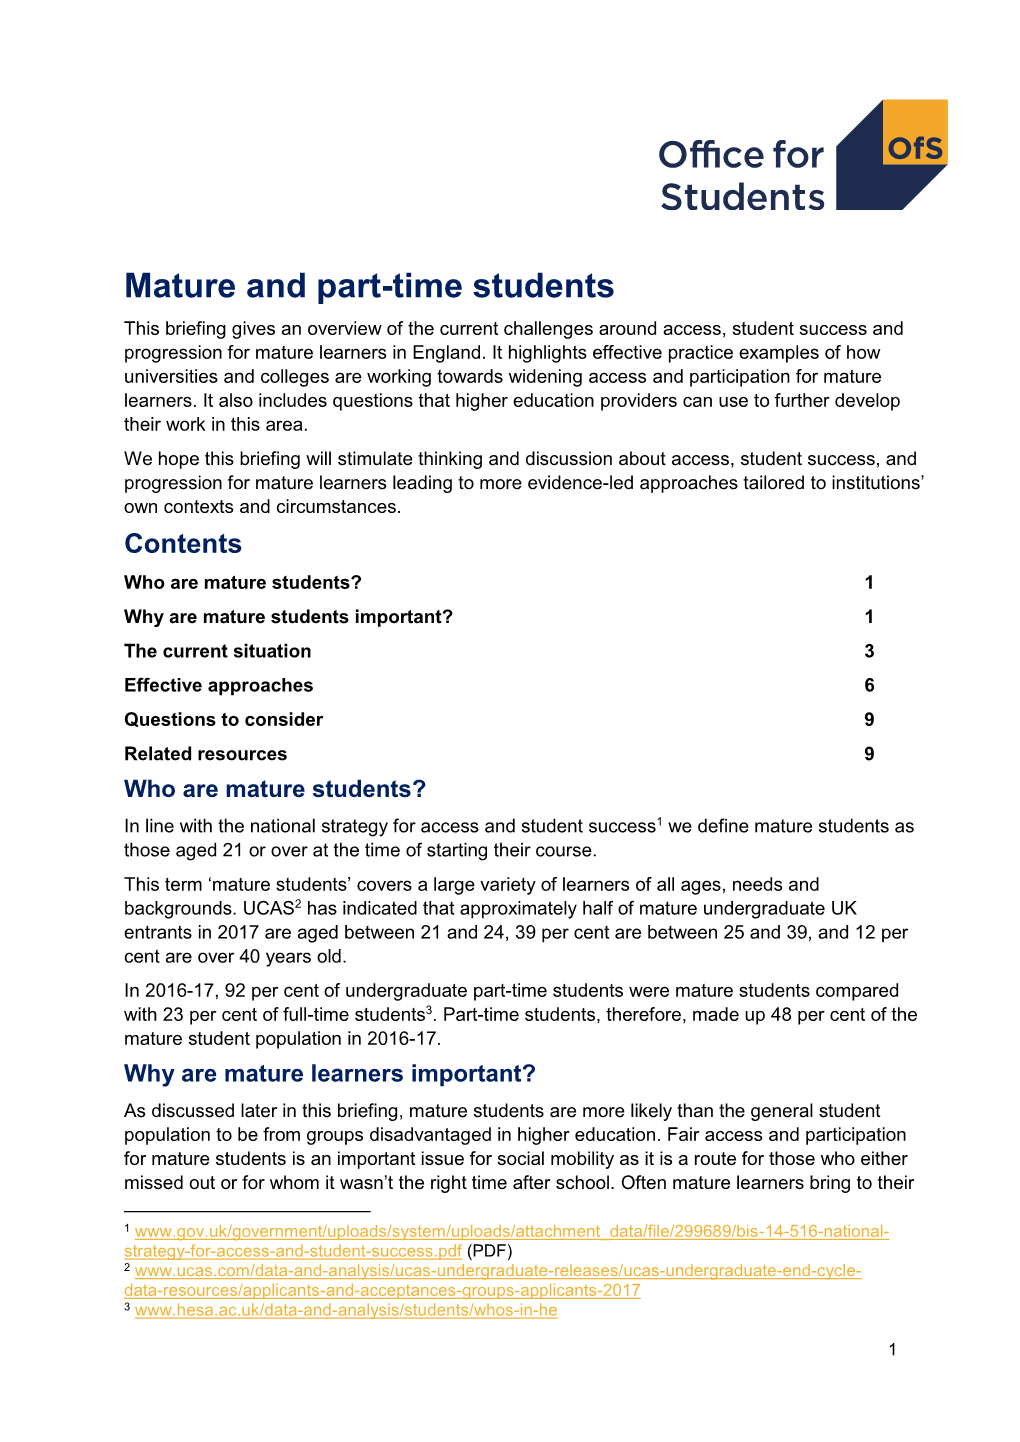 Mature and Part-Time Students This Briefing Gives an Overview of the Current Challenges Around Access, Student Success and Progression for Mature Learners in England